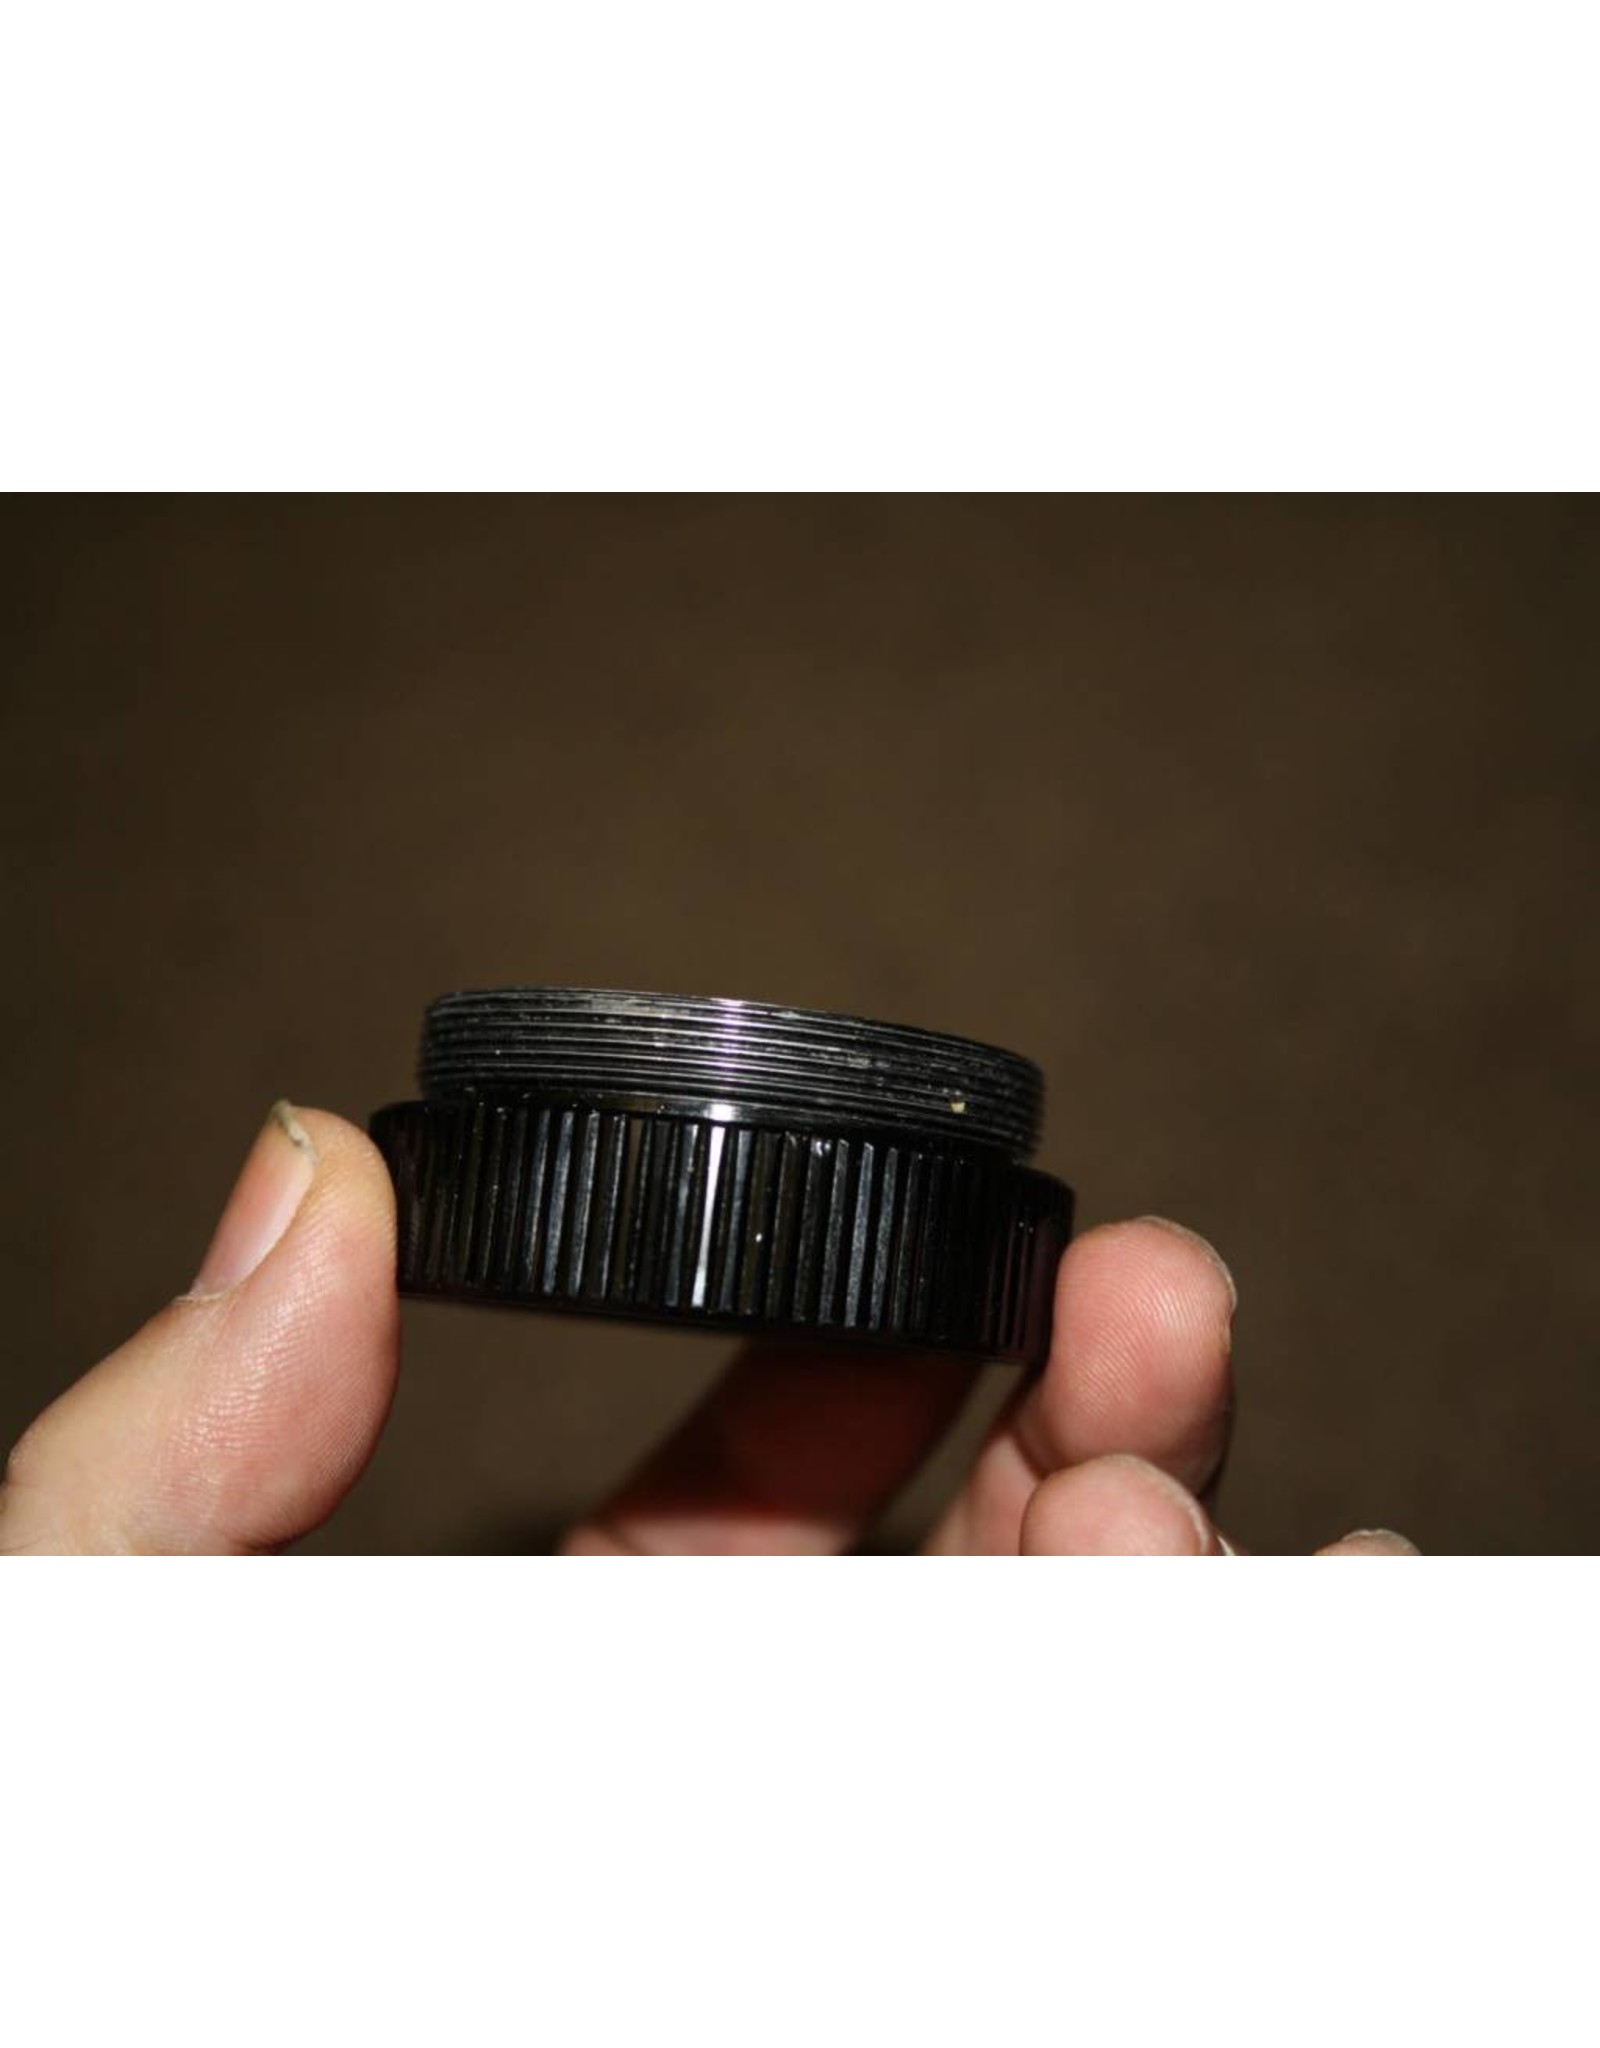 Meade Meade Sky Filter Dust Seal 1A #07288 (Pre-owned)